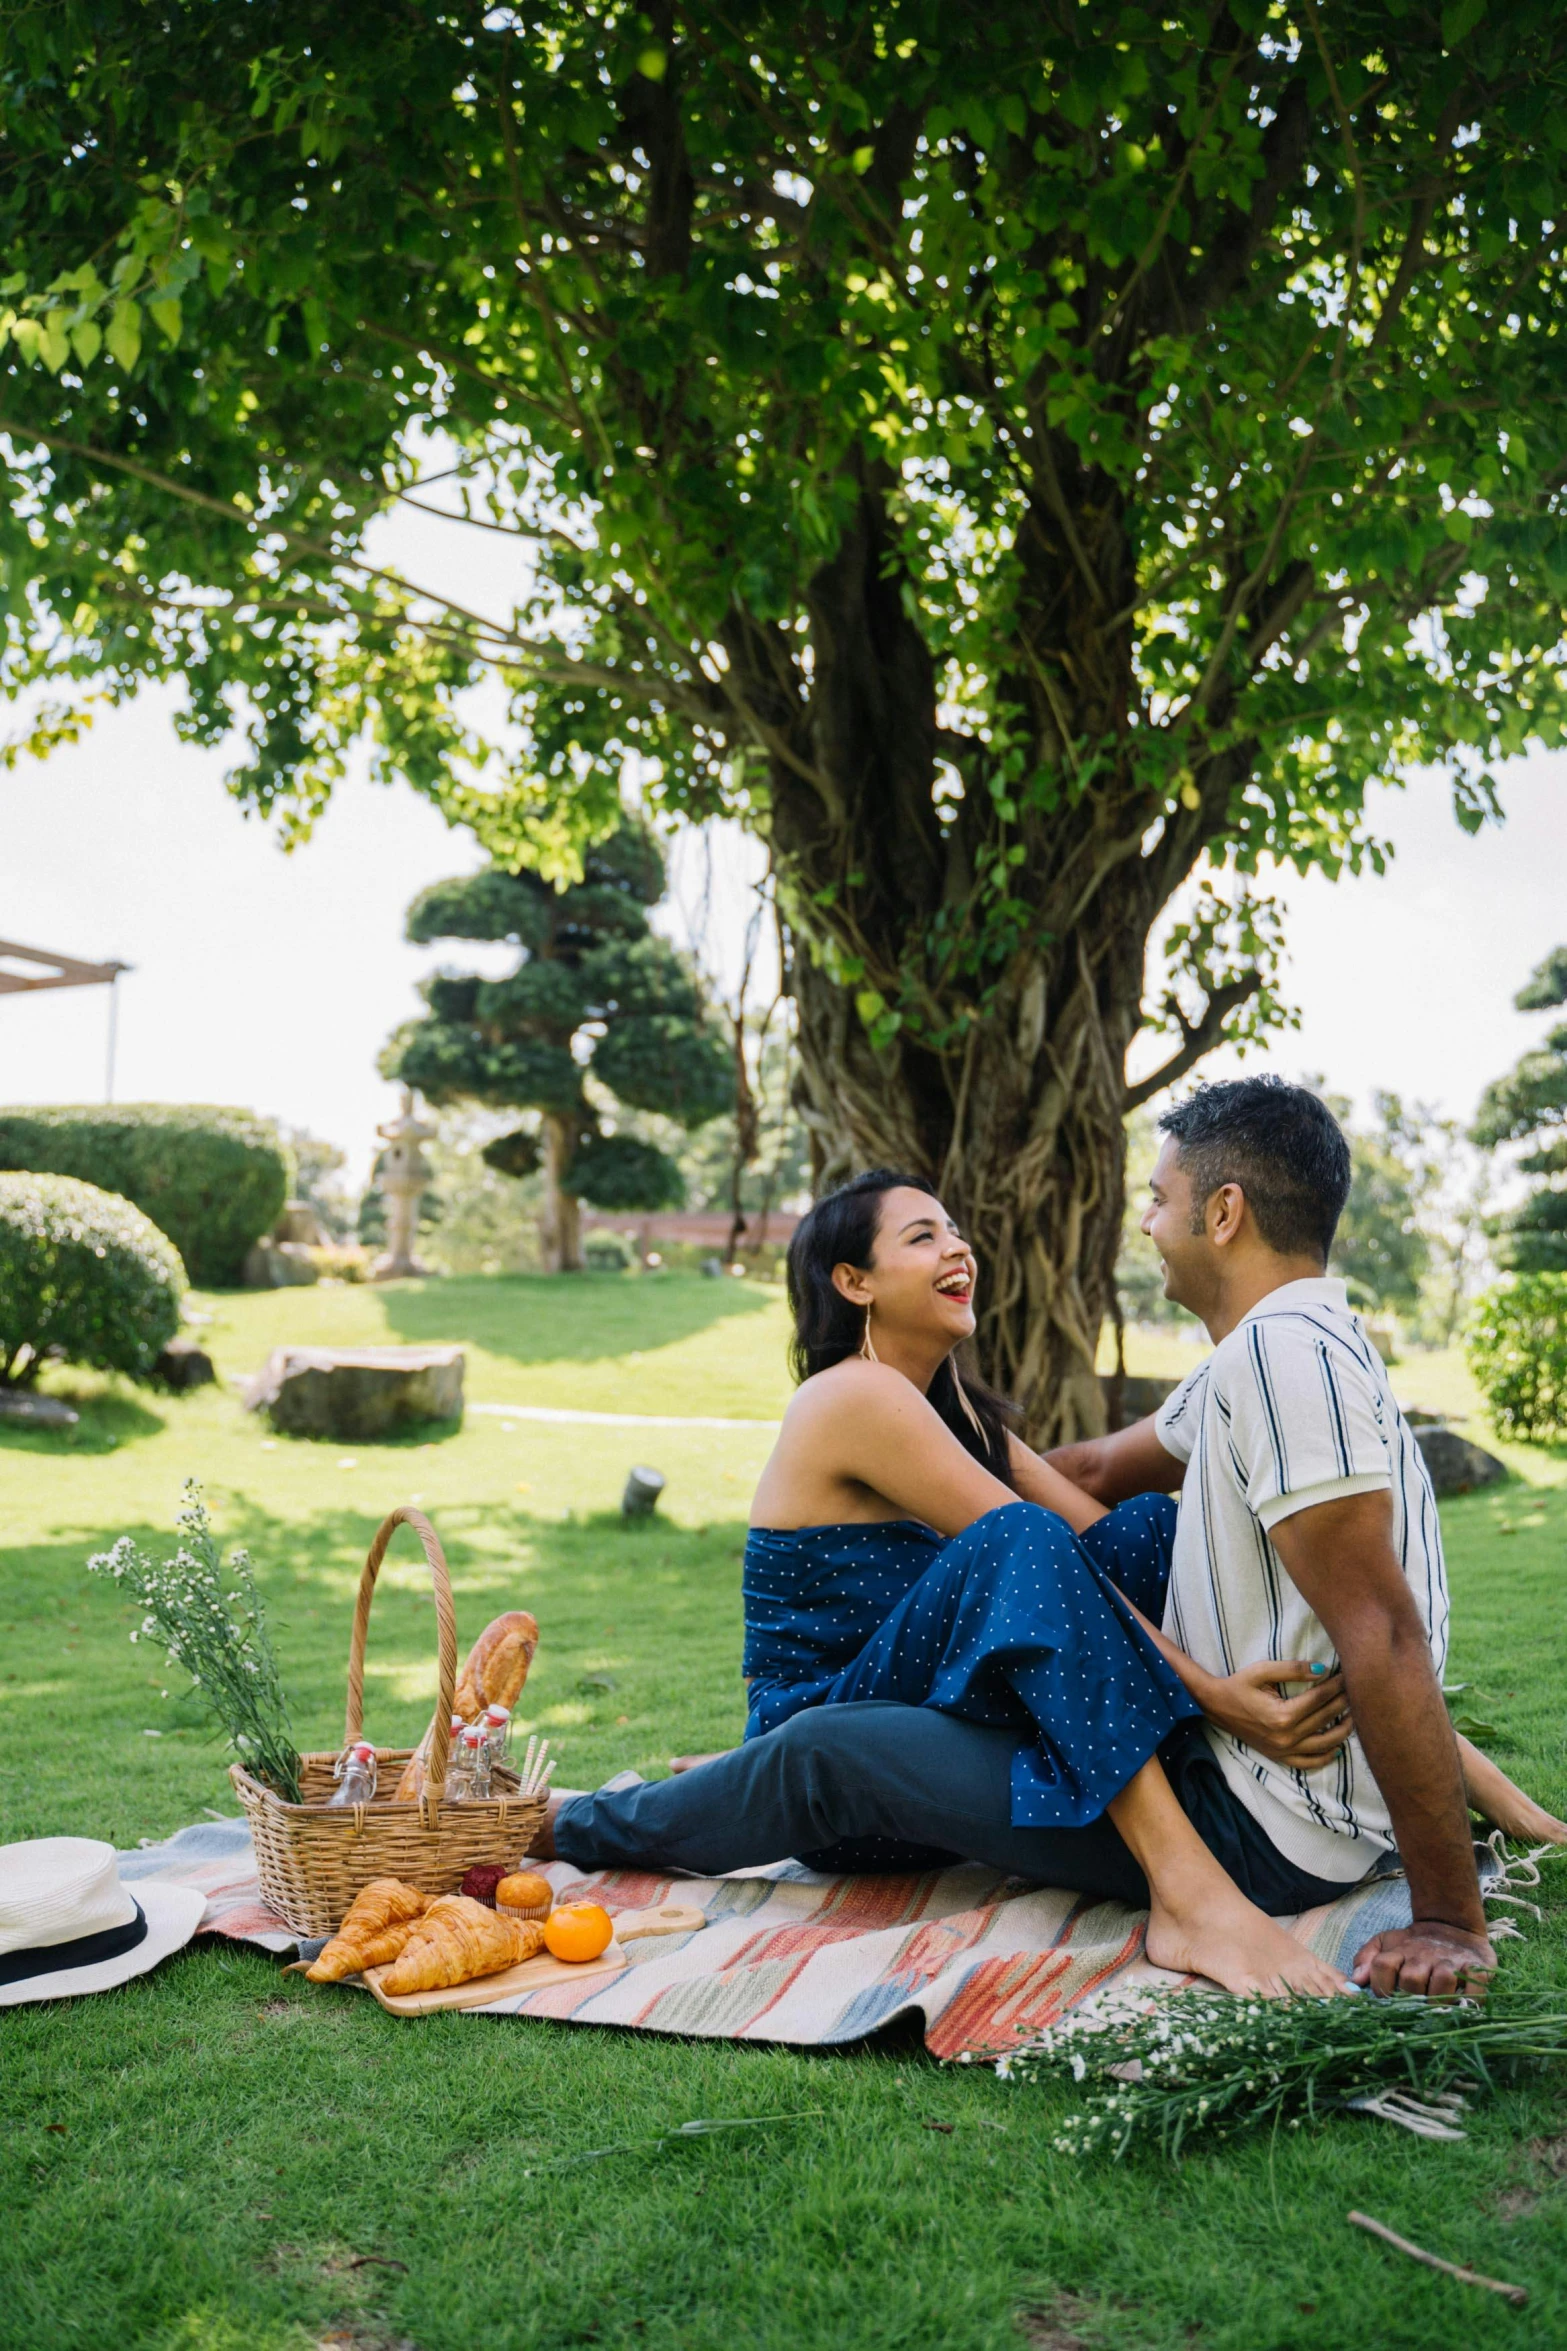 a man and woman sitting on a blanket under a tree, lush garden surroundings, breakfast, hoang lap, playful